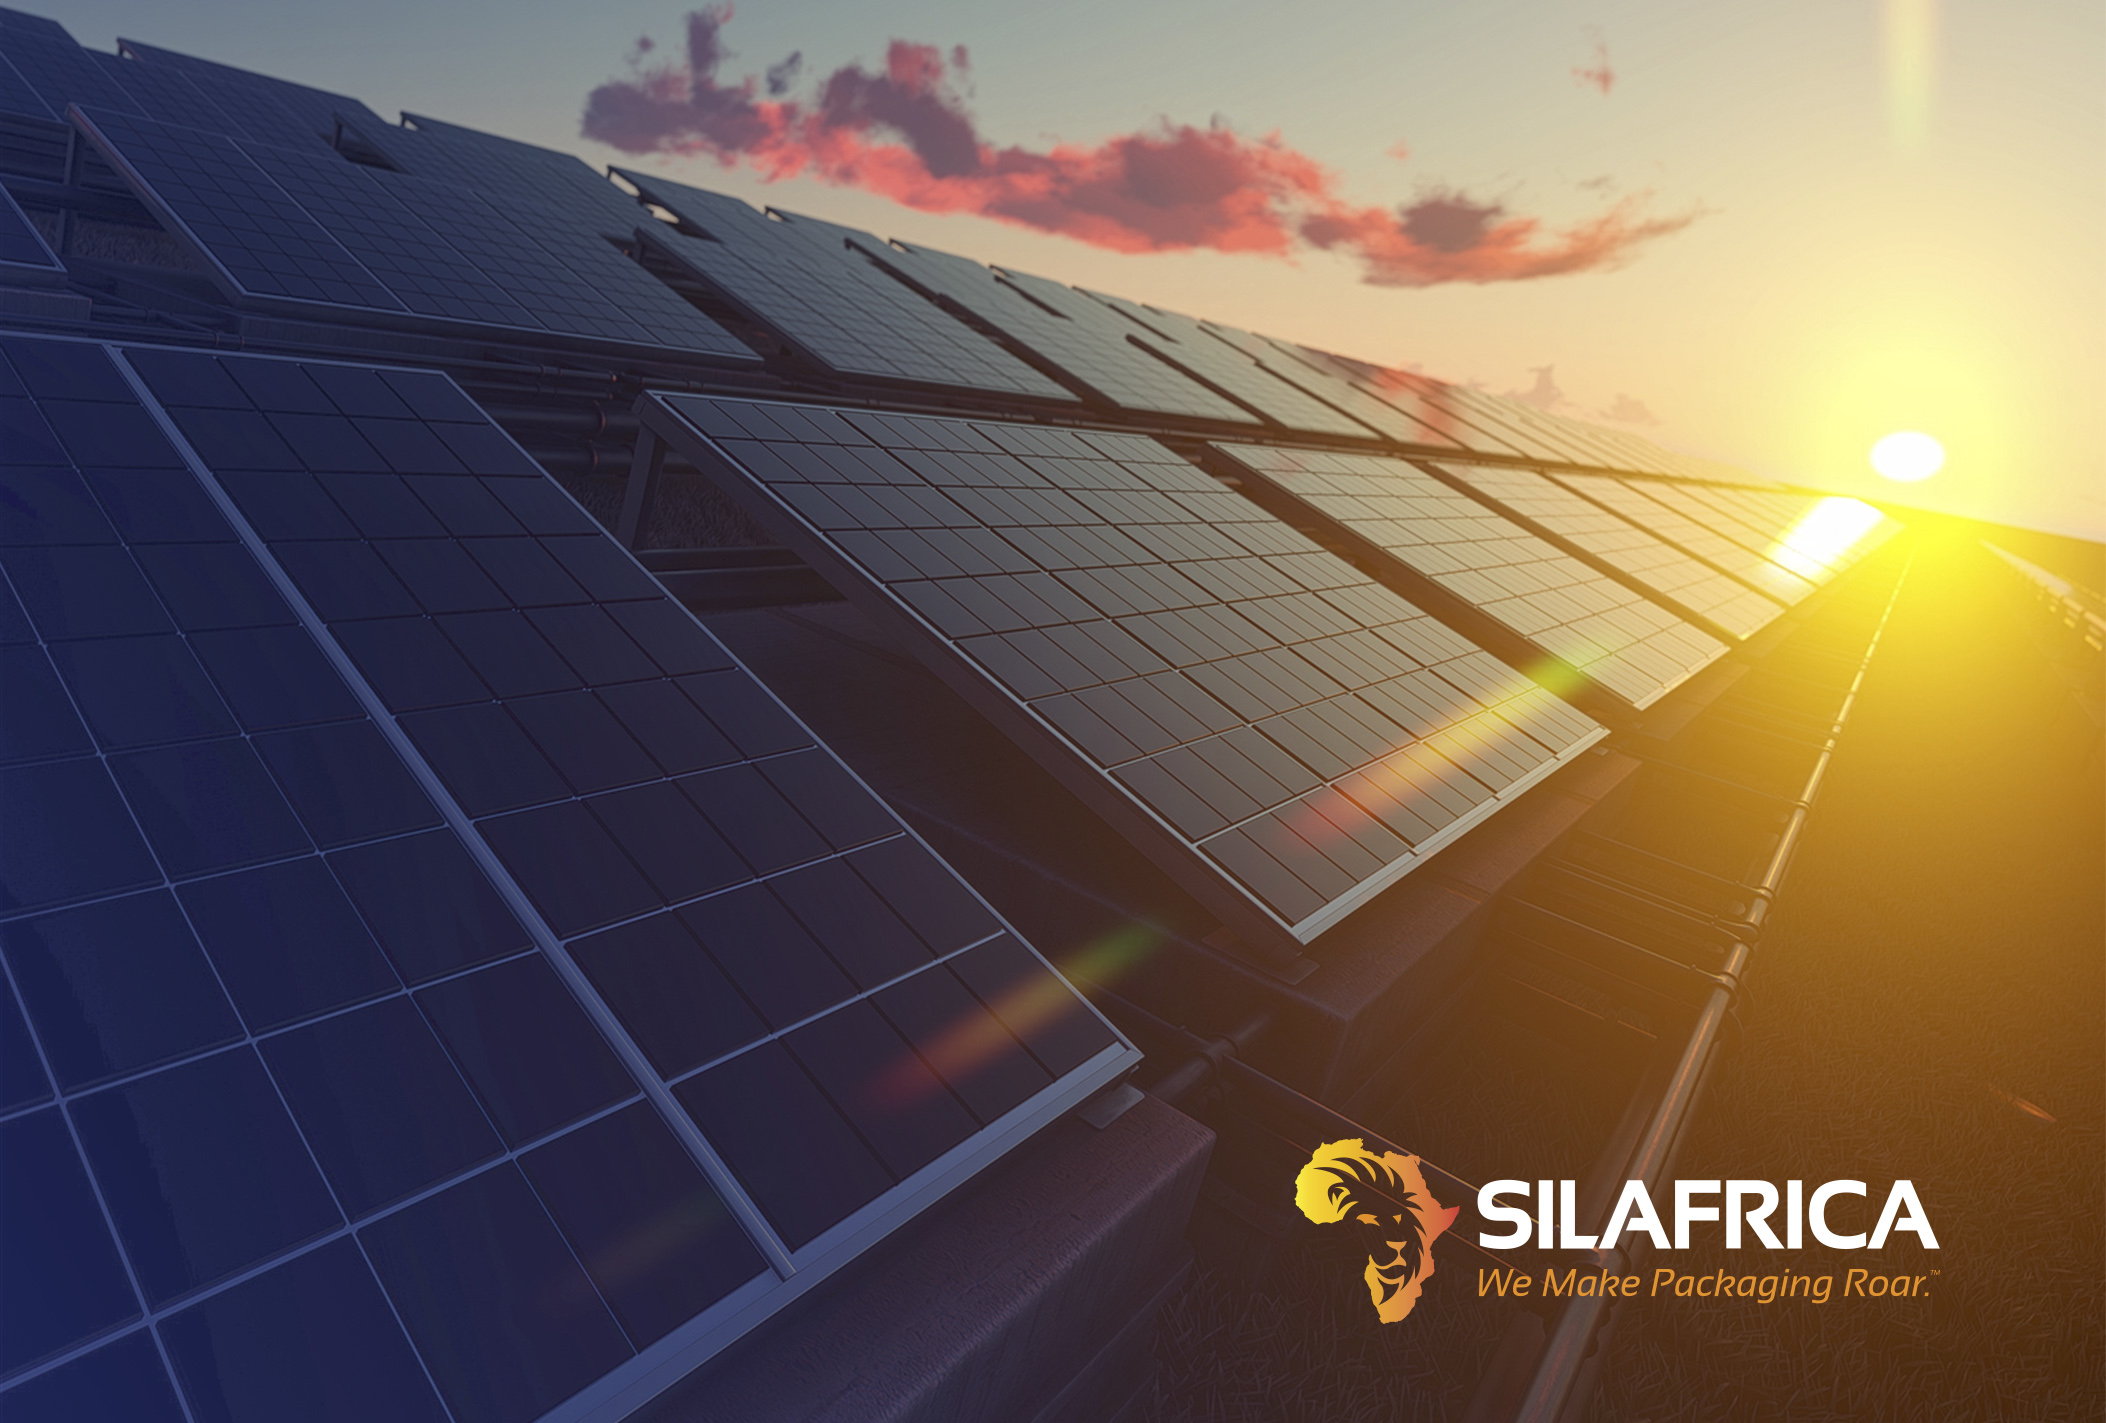 The solar power program itself is among a growing number of sustainability related initiatives that Silafrica is integrating into its operations.